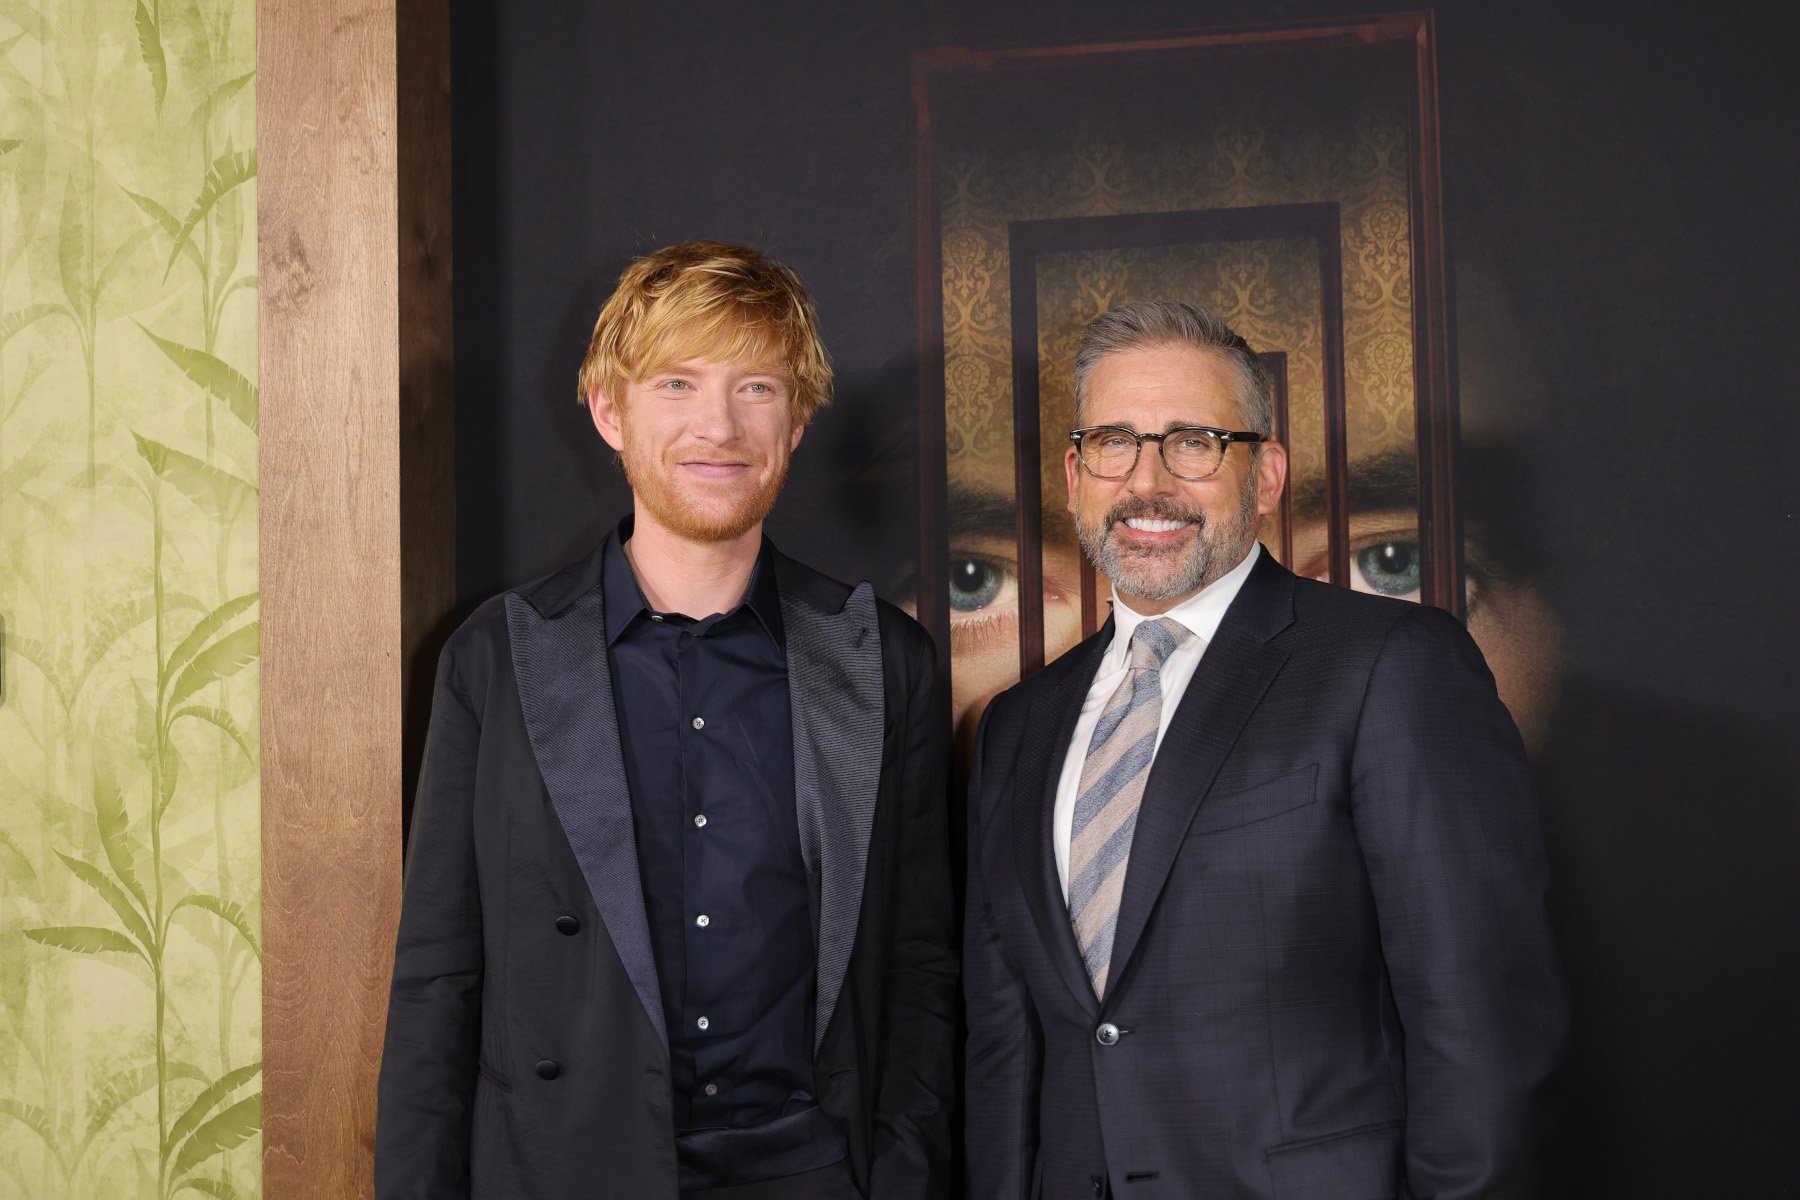 Domhnall Gleeson and Steve Carell on the red carpet for 'The Patient.' They're standing in front of key art for the series, wearing suits, and smiling.